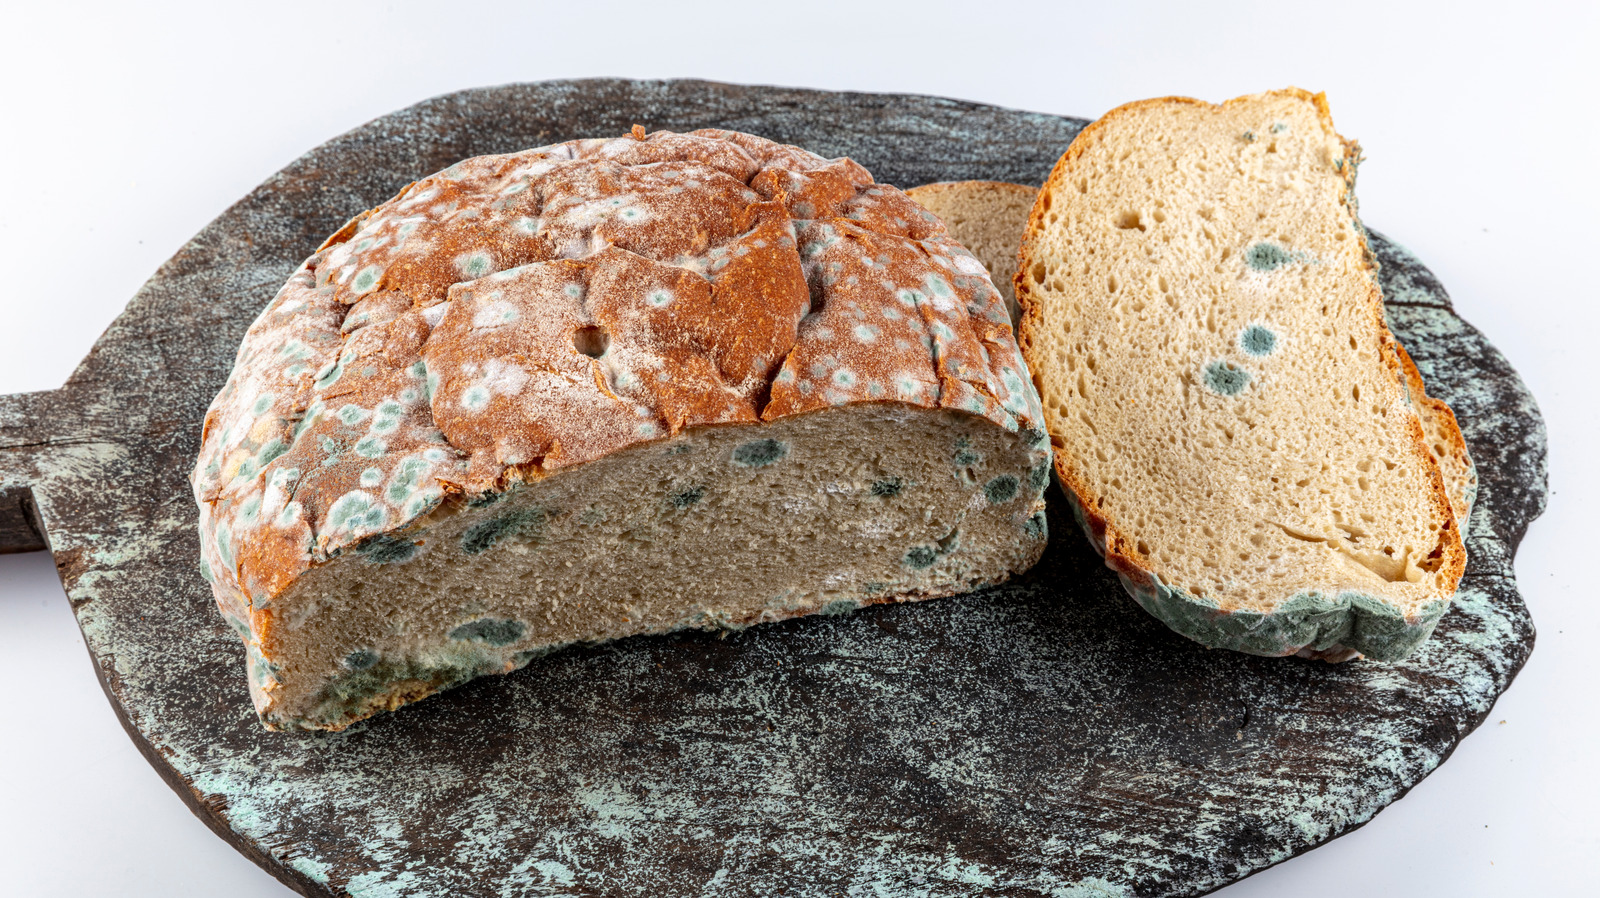 Is It Safe to Eat Moldy Bread?